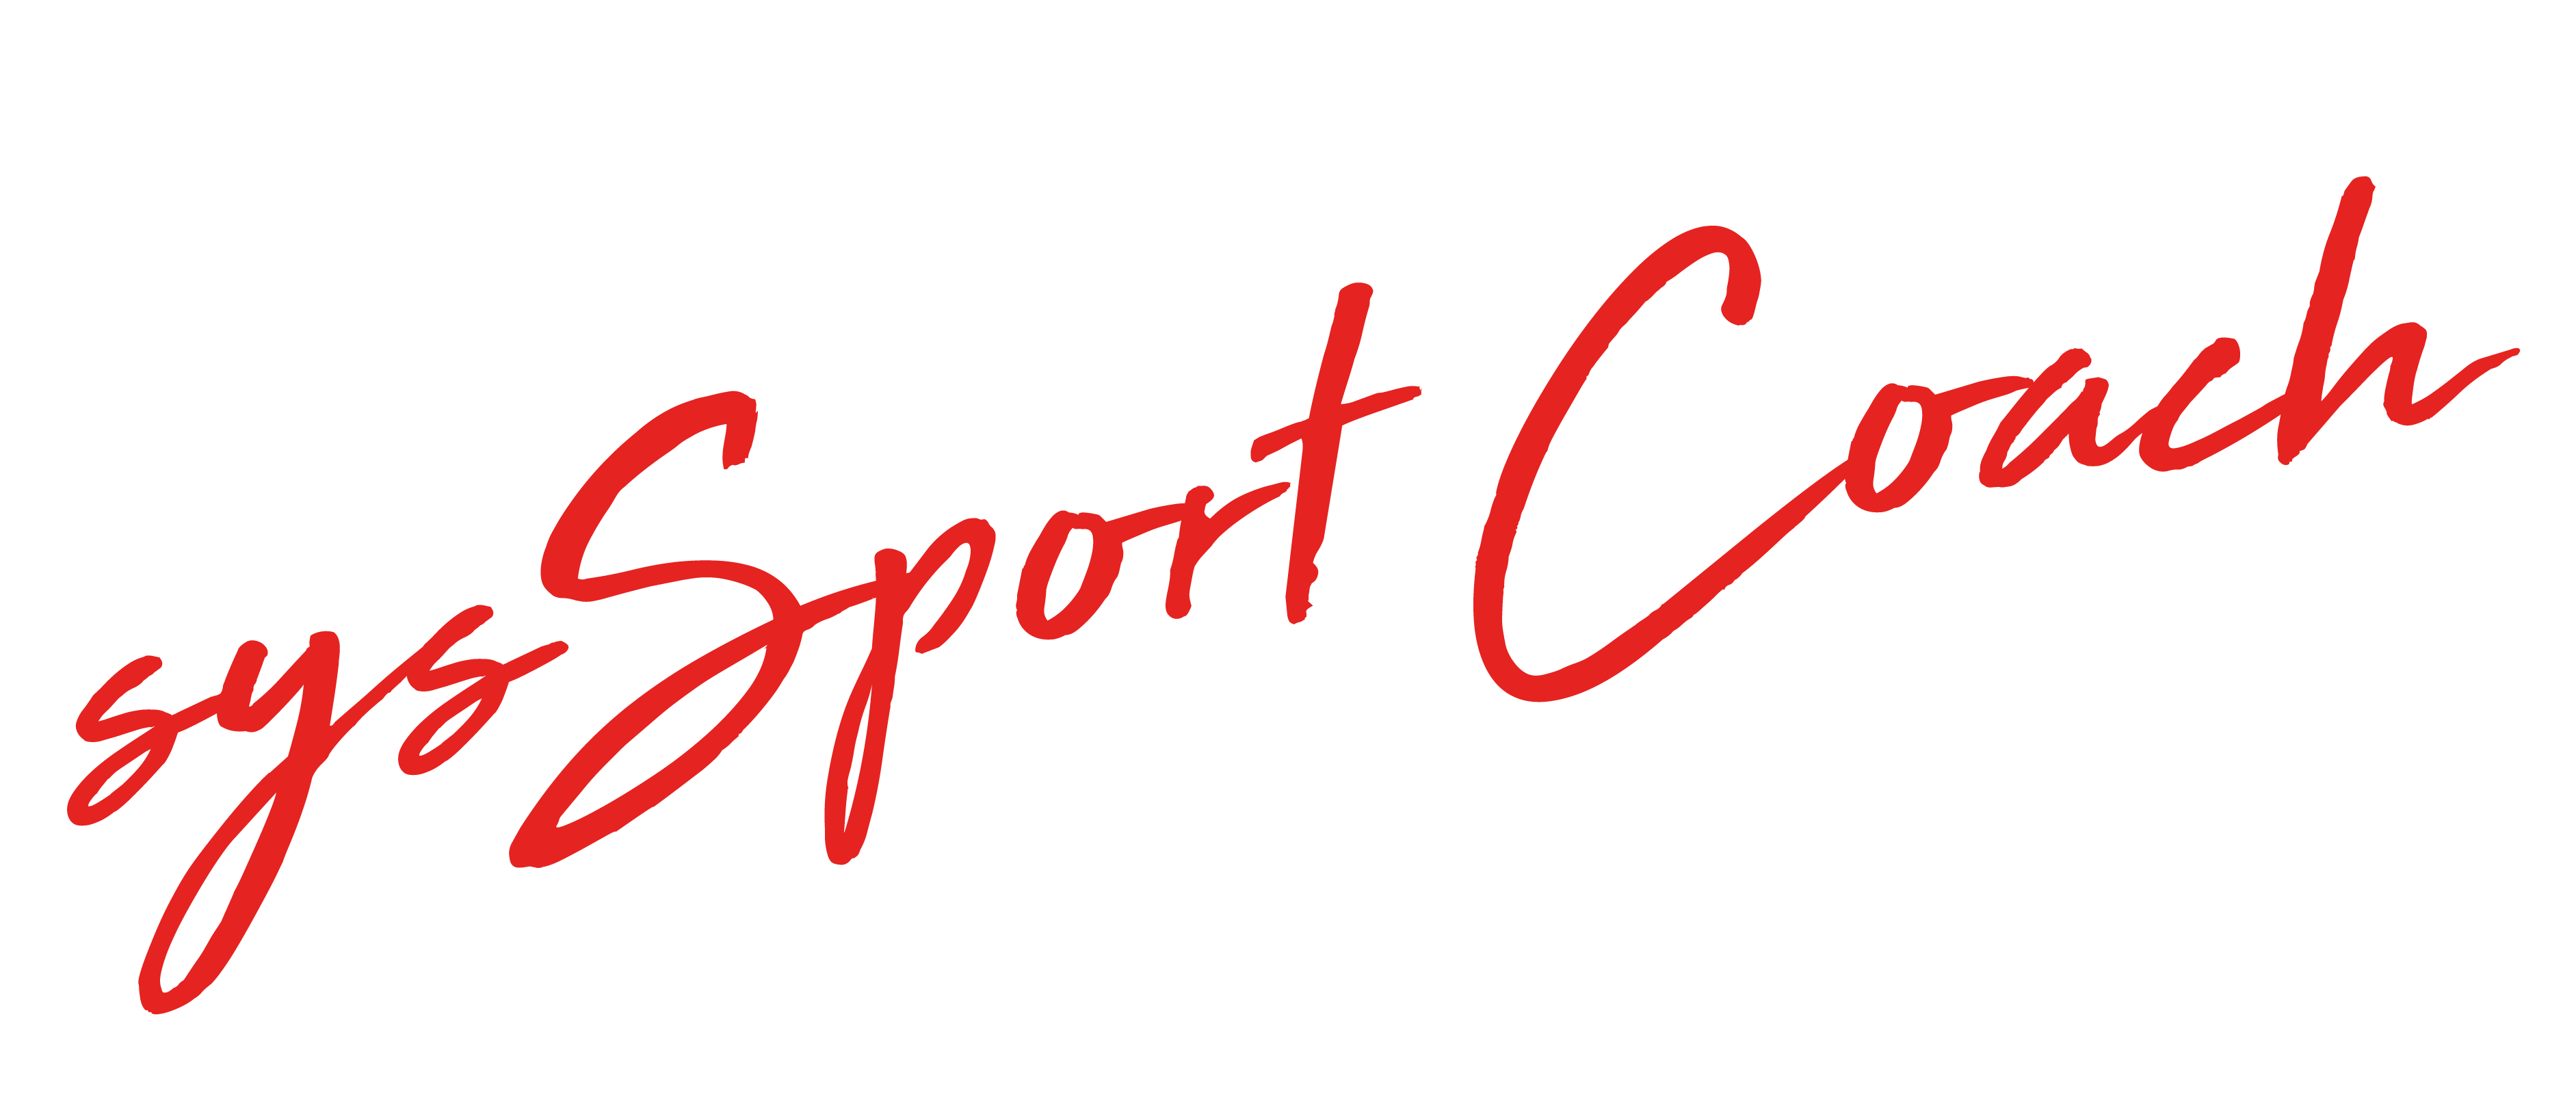 syssport Coach rot